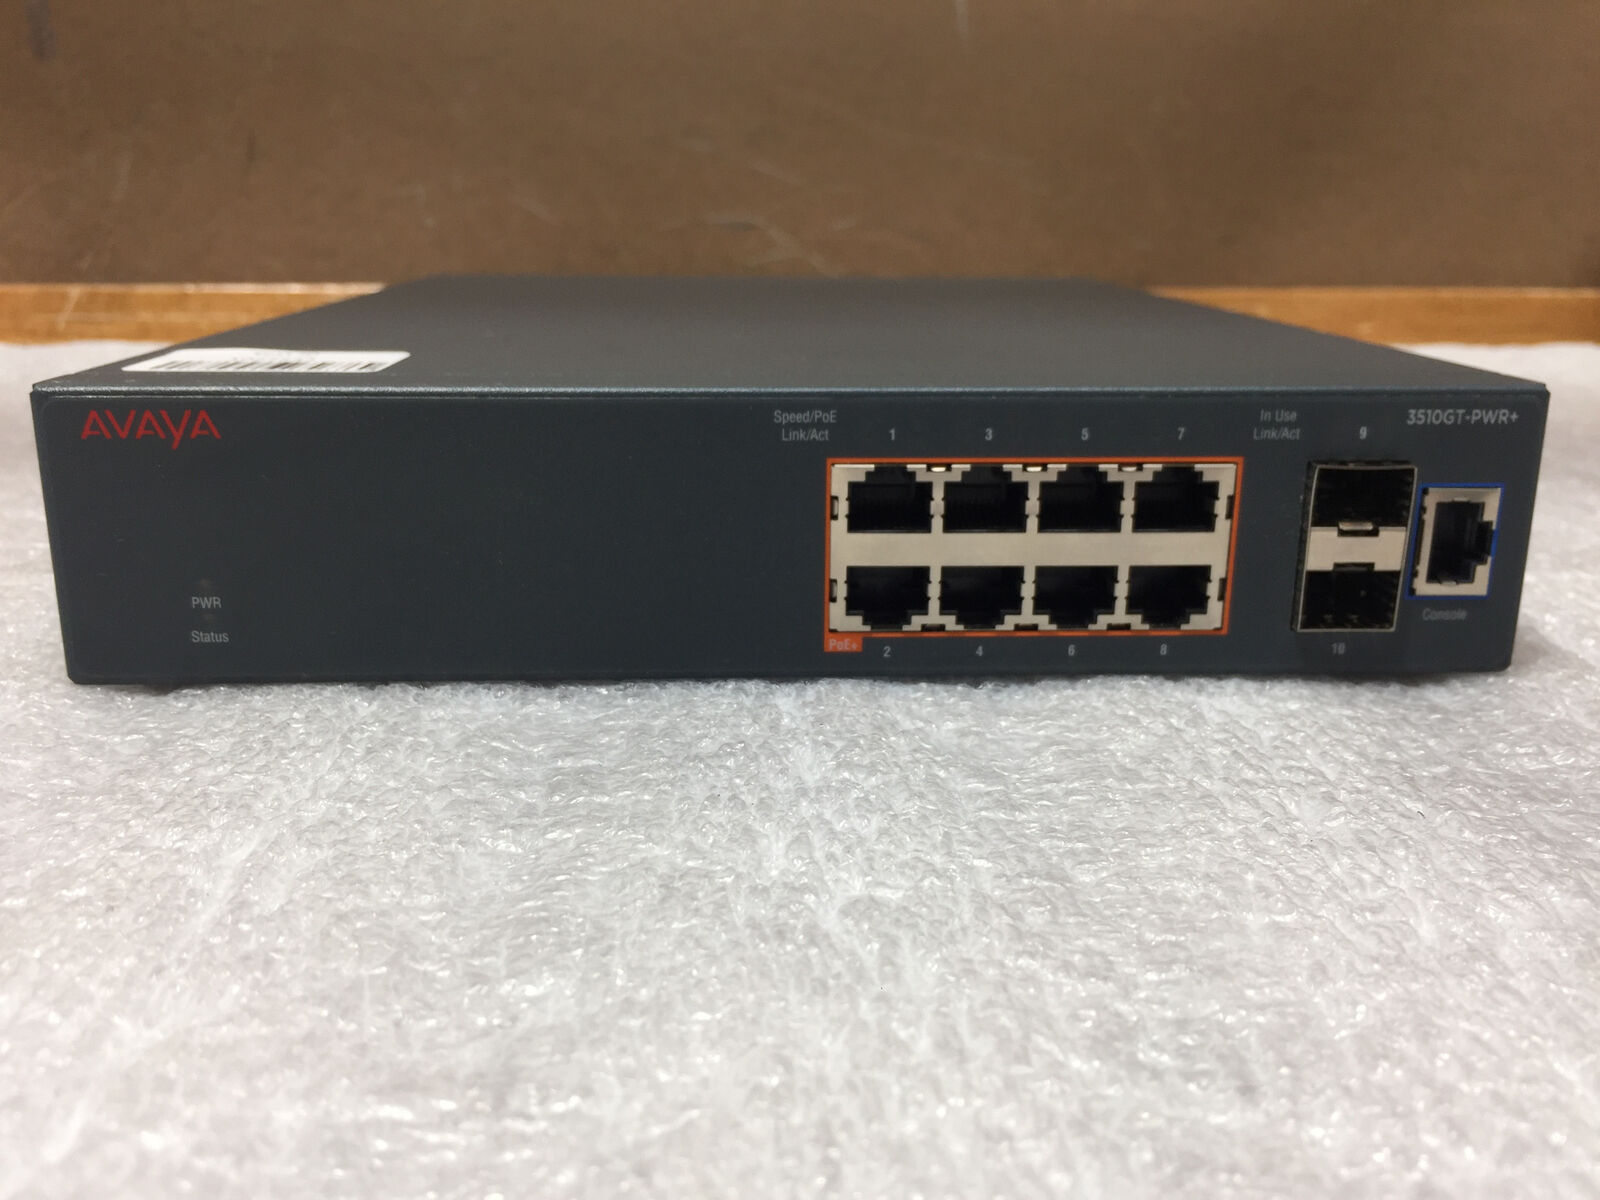 AVAYA 3510GT-PWR+ 8-Port Ethernet Routing Standalone Switch, --FACTORY RESET